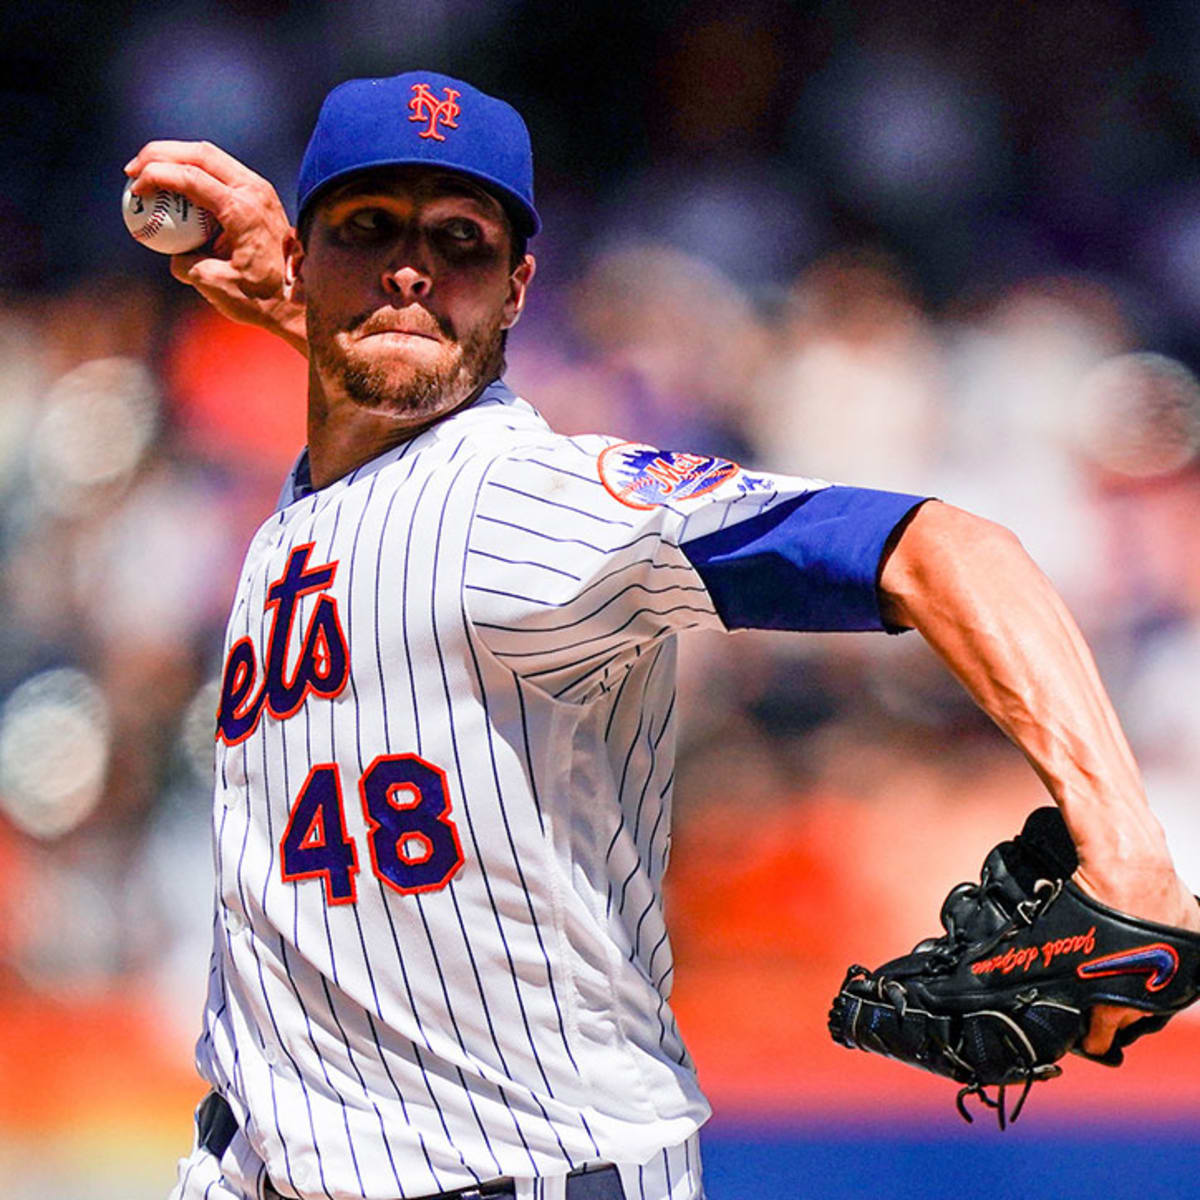 Jacob deGrom won the Cy Young with one of the greatest, silliest seasons  ever 